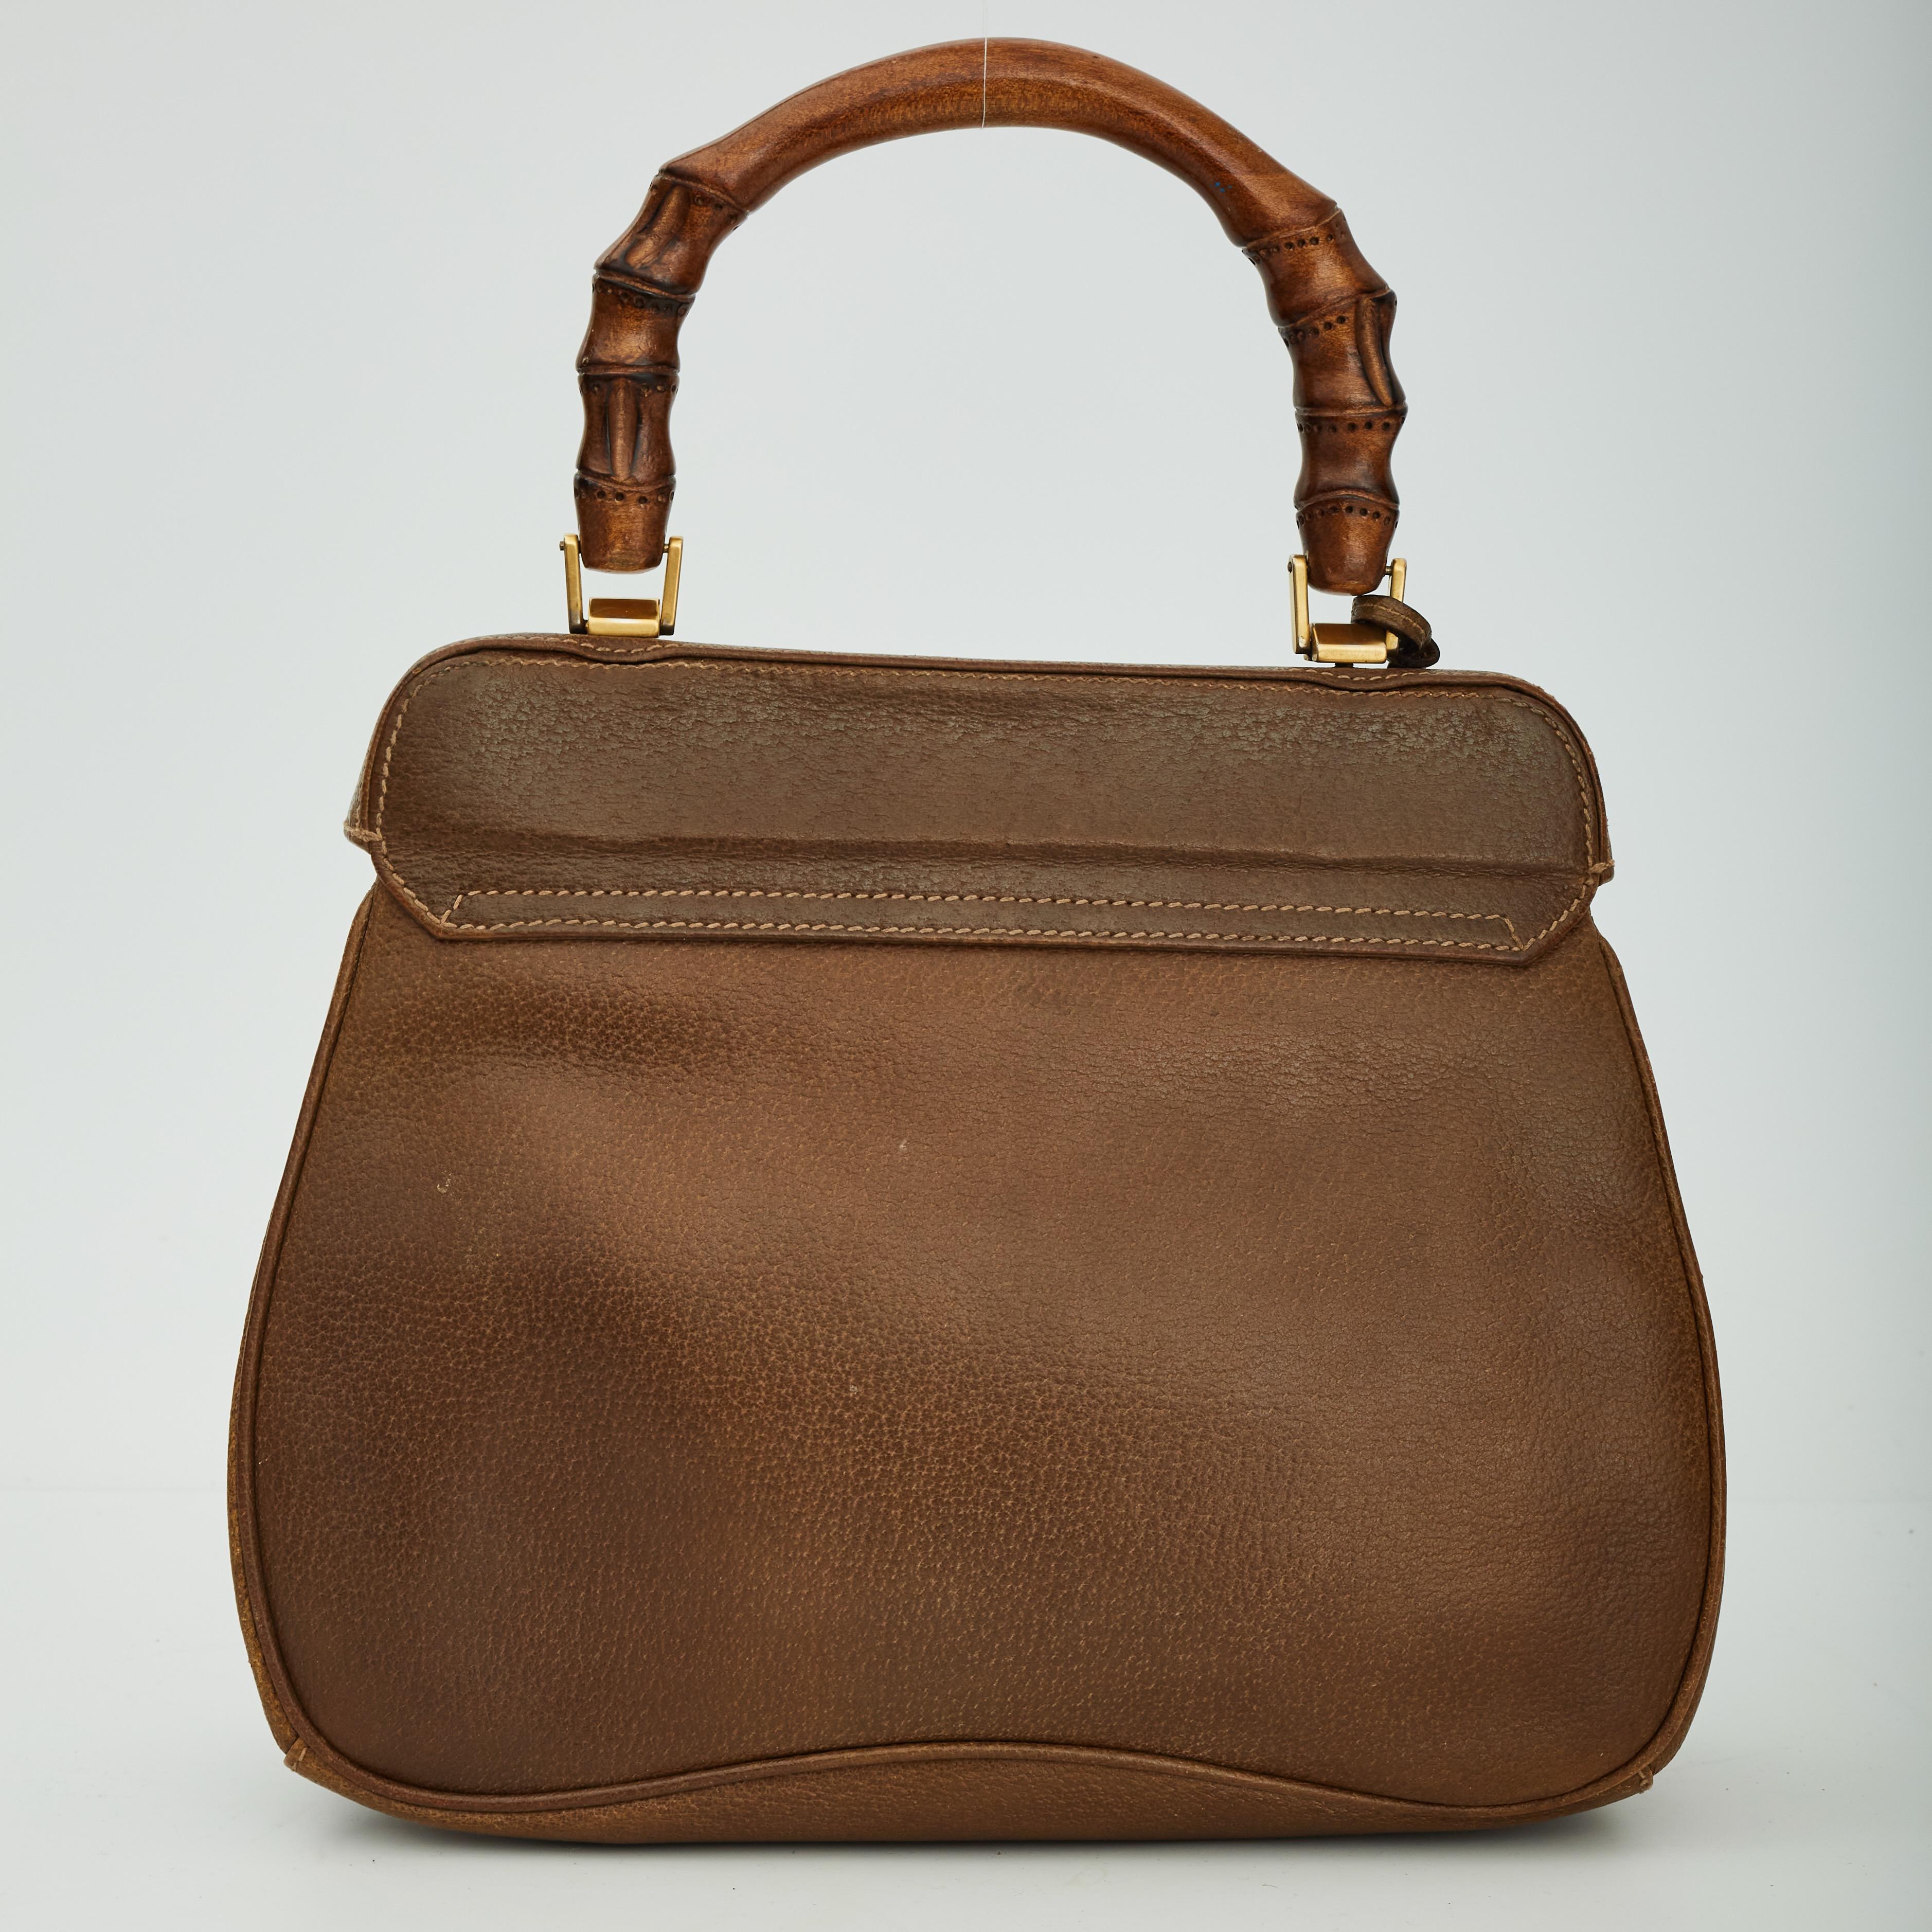 COLOR: Brown
MATERIAL: Textured leather
ITEM CODE: 000, 406, 0190 
MEASURES: H 8.5” x L 11” x D 4.5”
DROP: 4.5”
CONDITION: Good - bag was professionally furbished and dyed. Interior small stains, marks and discoloration.

Made in Italy